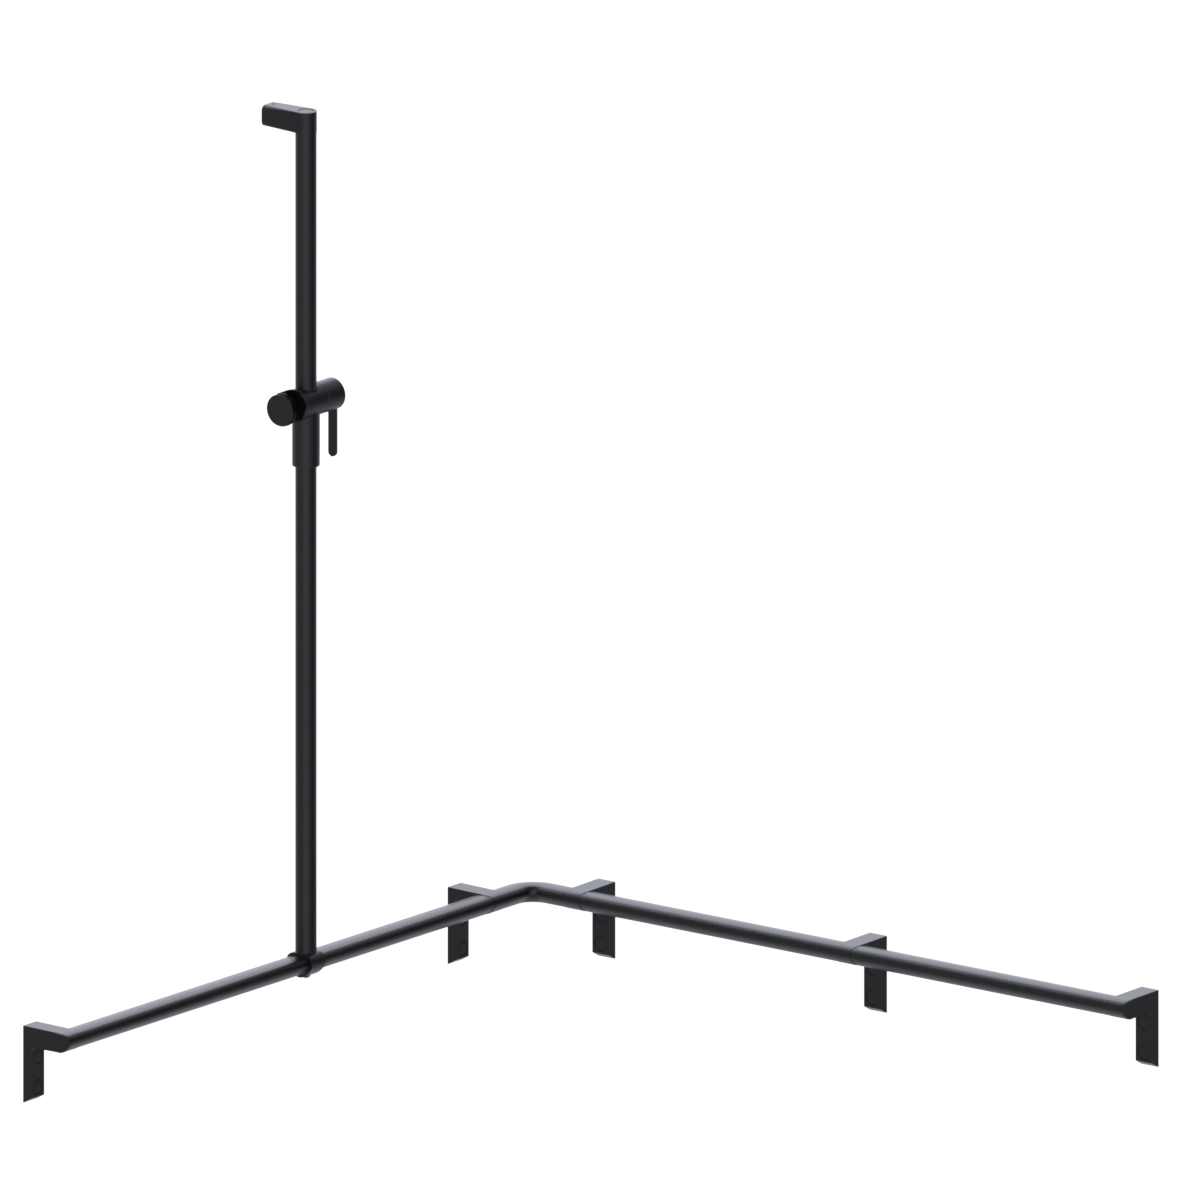 Cavere Care Shower handrail, with movable shower handrail, left, 1100 x 1100 x 1200 mm, Cavere Carbon black